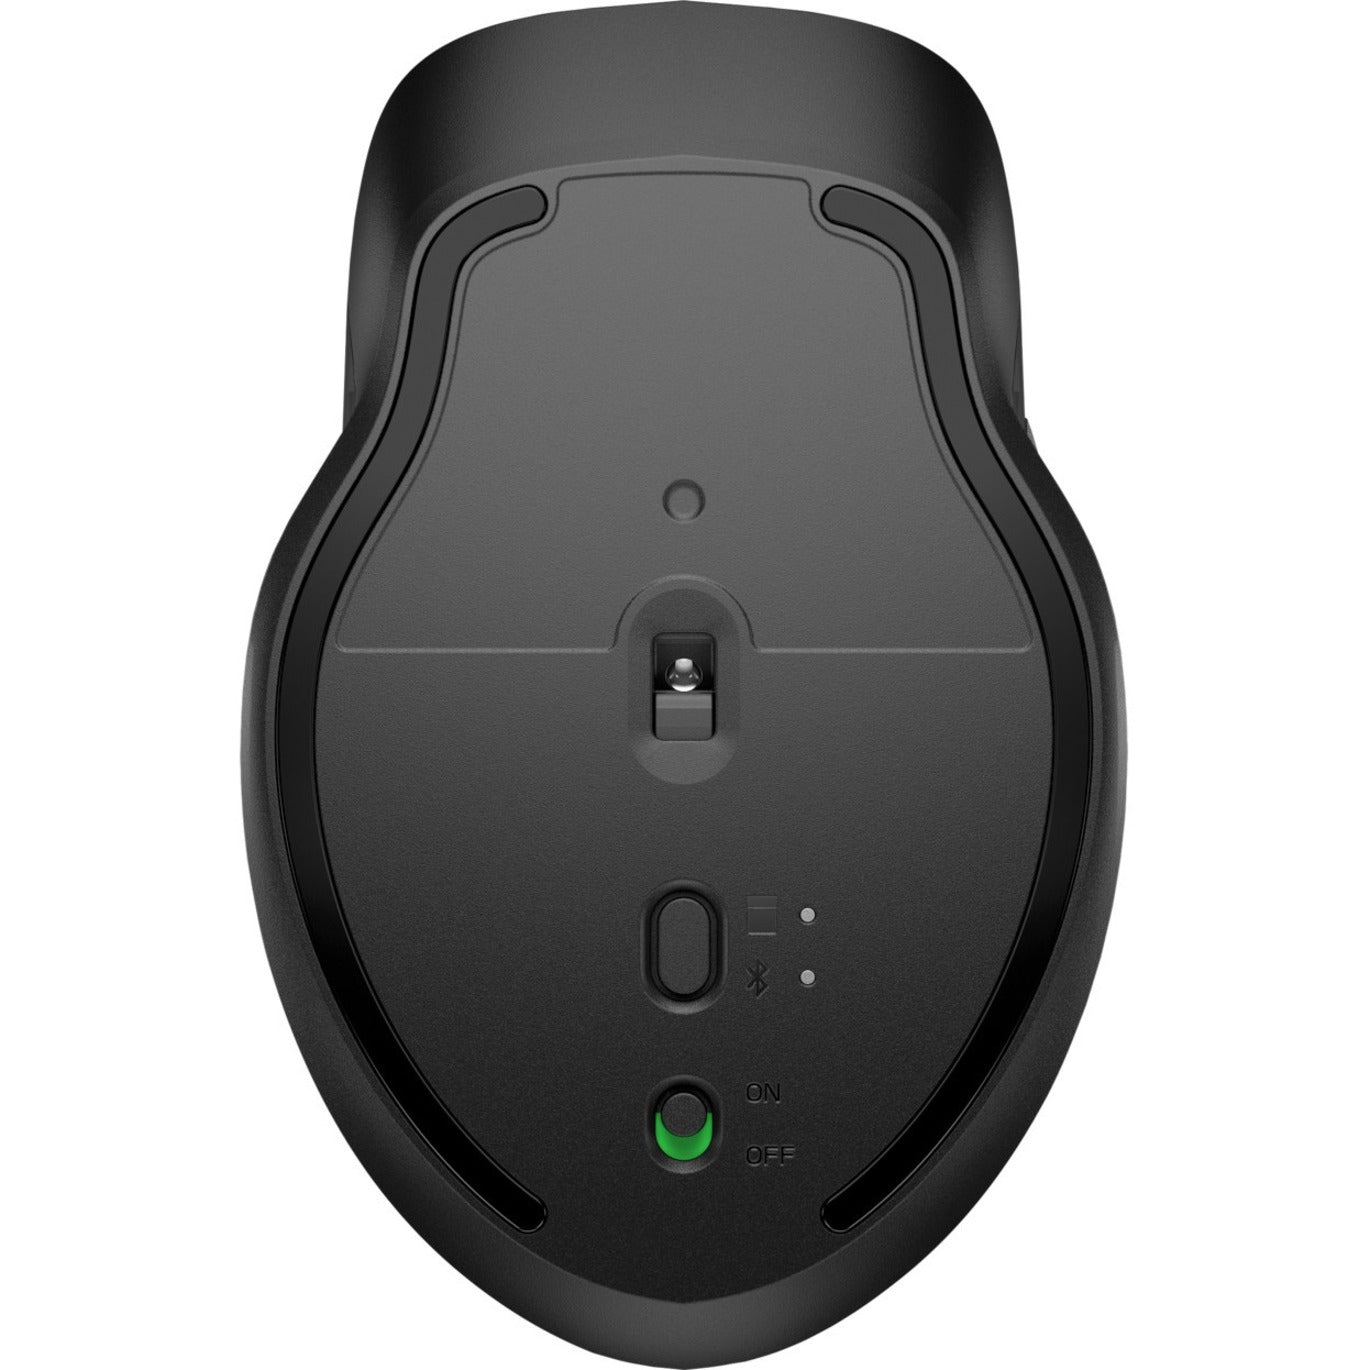 HP 3B4Q2AA#ABL 430 Multi-Device Wireless Mouse, Blue Optical, 4000 dpi, 5 Buttons